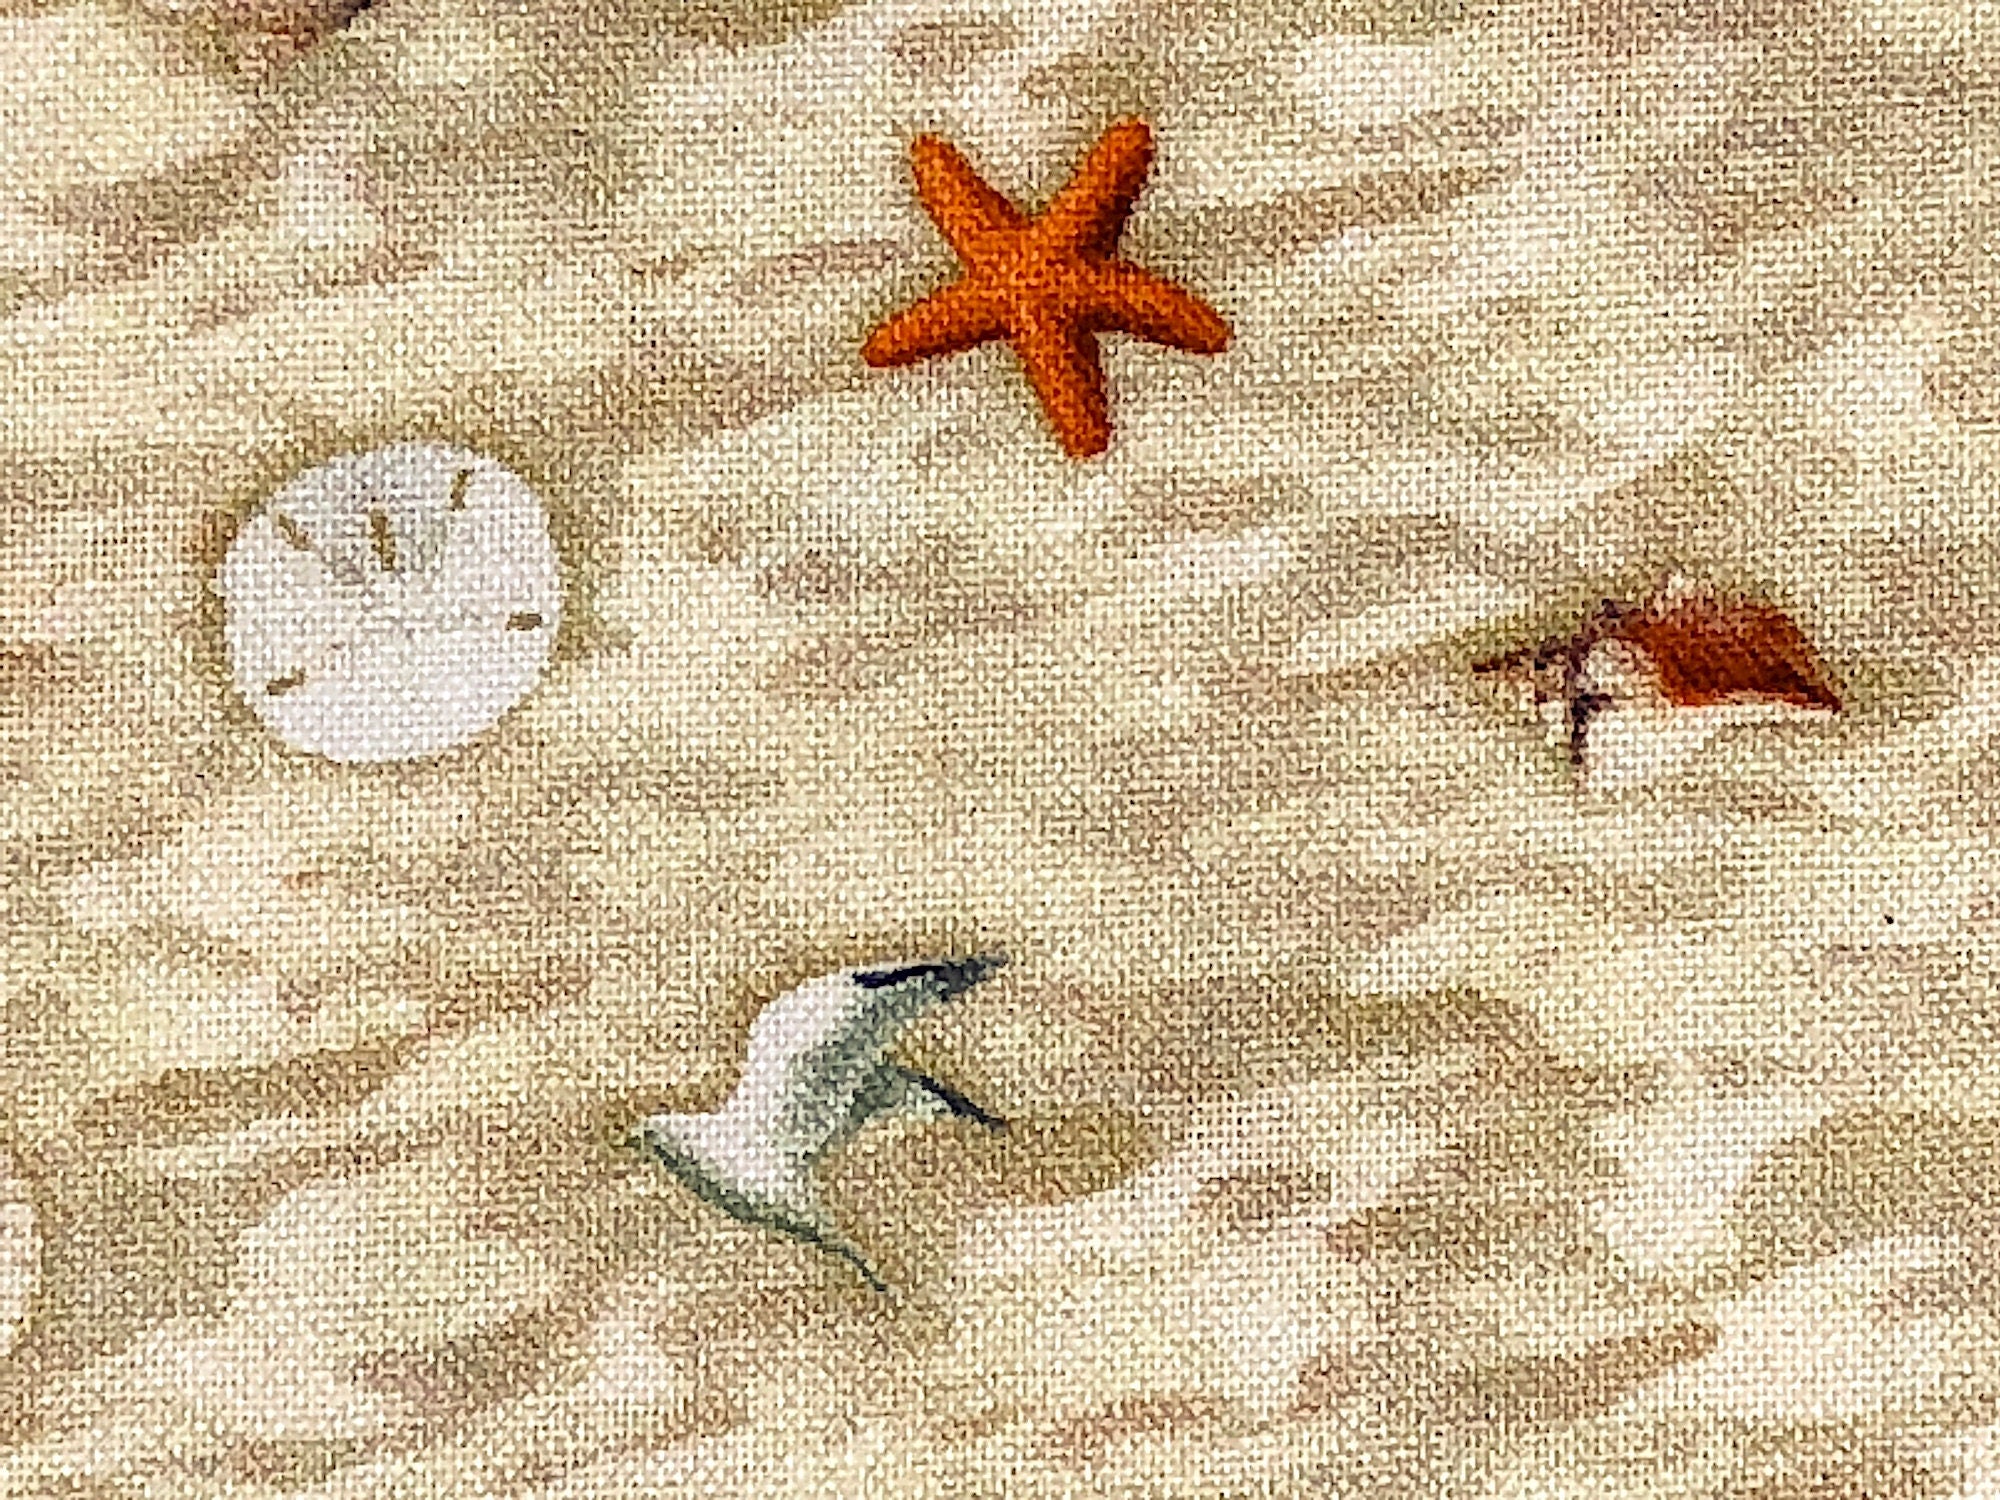 Closeup of sand fabric with sea shells and a bird.